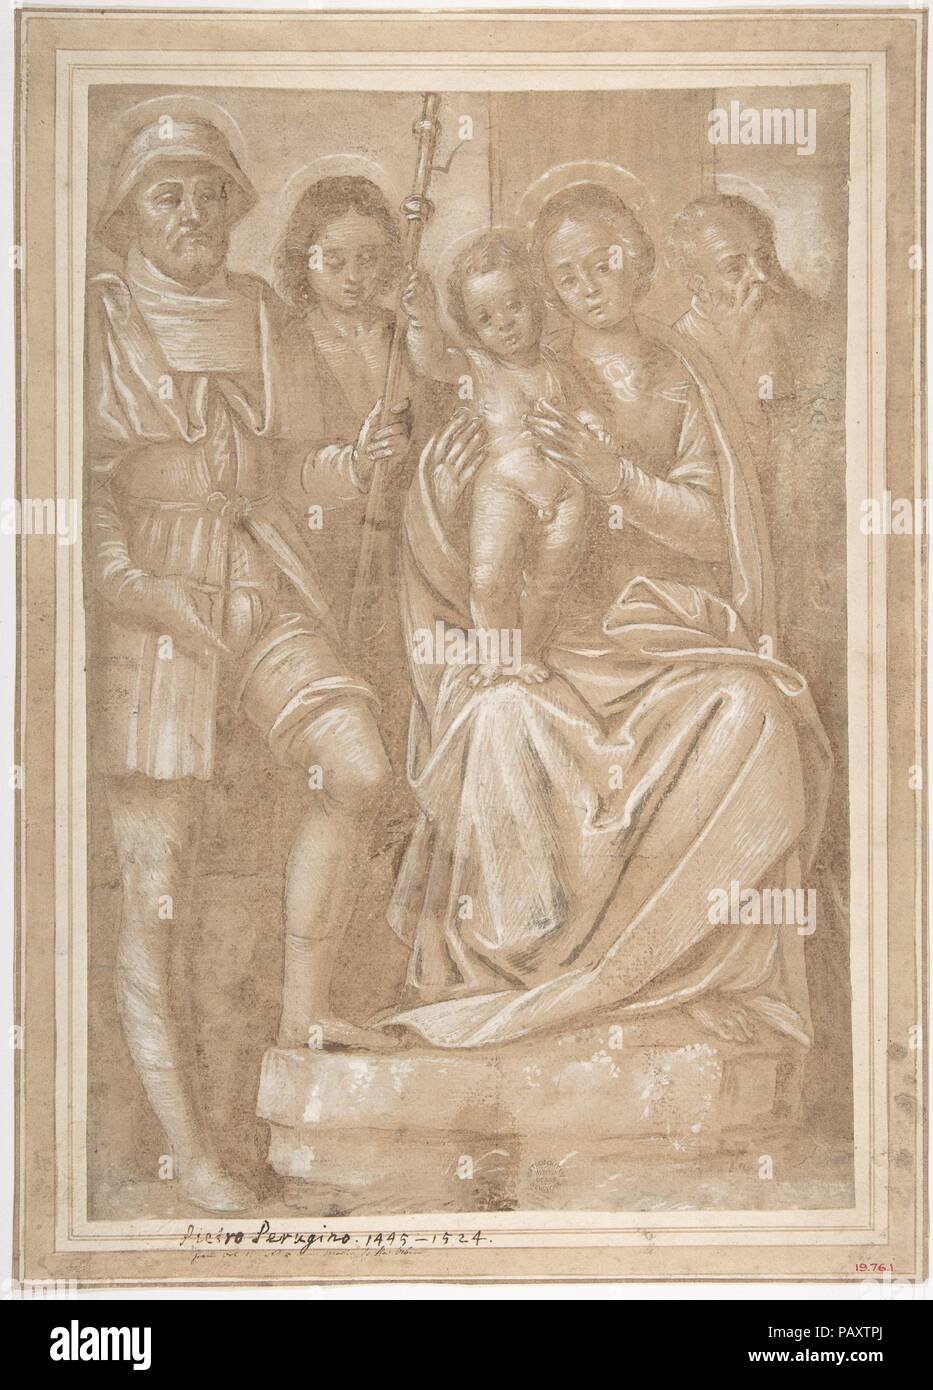 The Virgin and Child with Saint Roch and Two Other Male Saints. Artist: Attributed to Bernardino Lanino (Italian, Vercelli or Mortara 1509/13- 1582/83 Vercelli). Dimensions: 13 3/8 x 9 1/8in. (33.9 x 23.1cm). Date: 1512-83. Museum: Metropolitan Museum of Art, New York, USA. Stock Photo